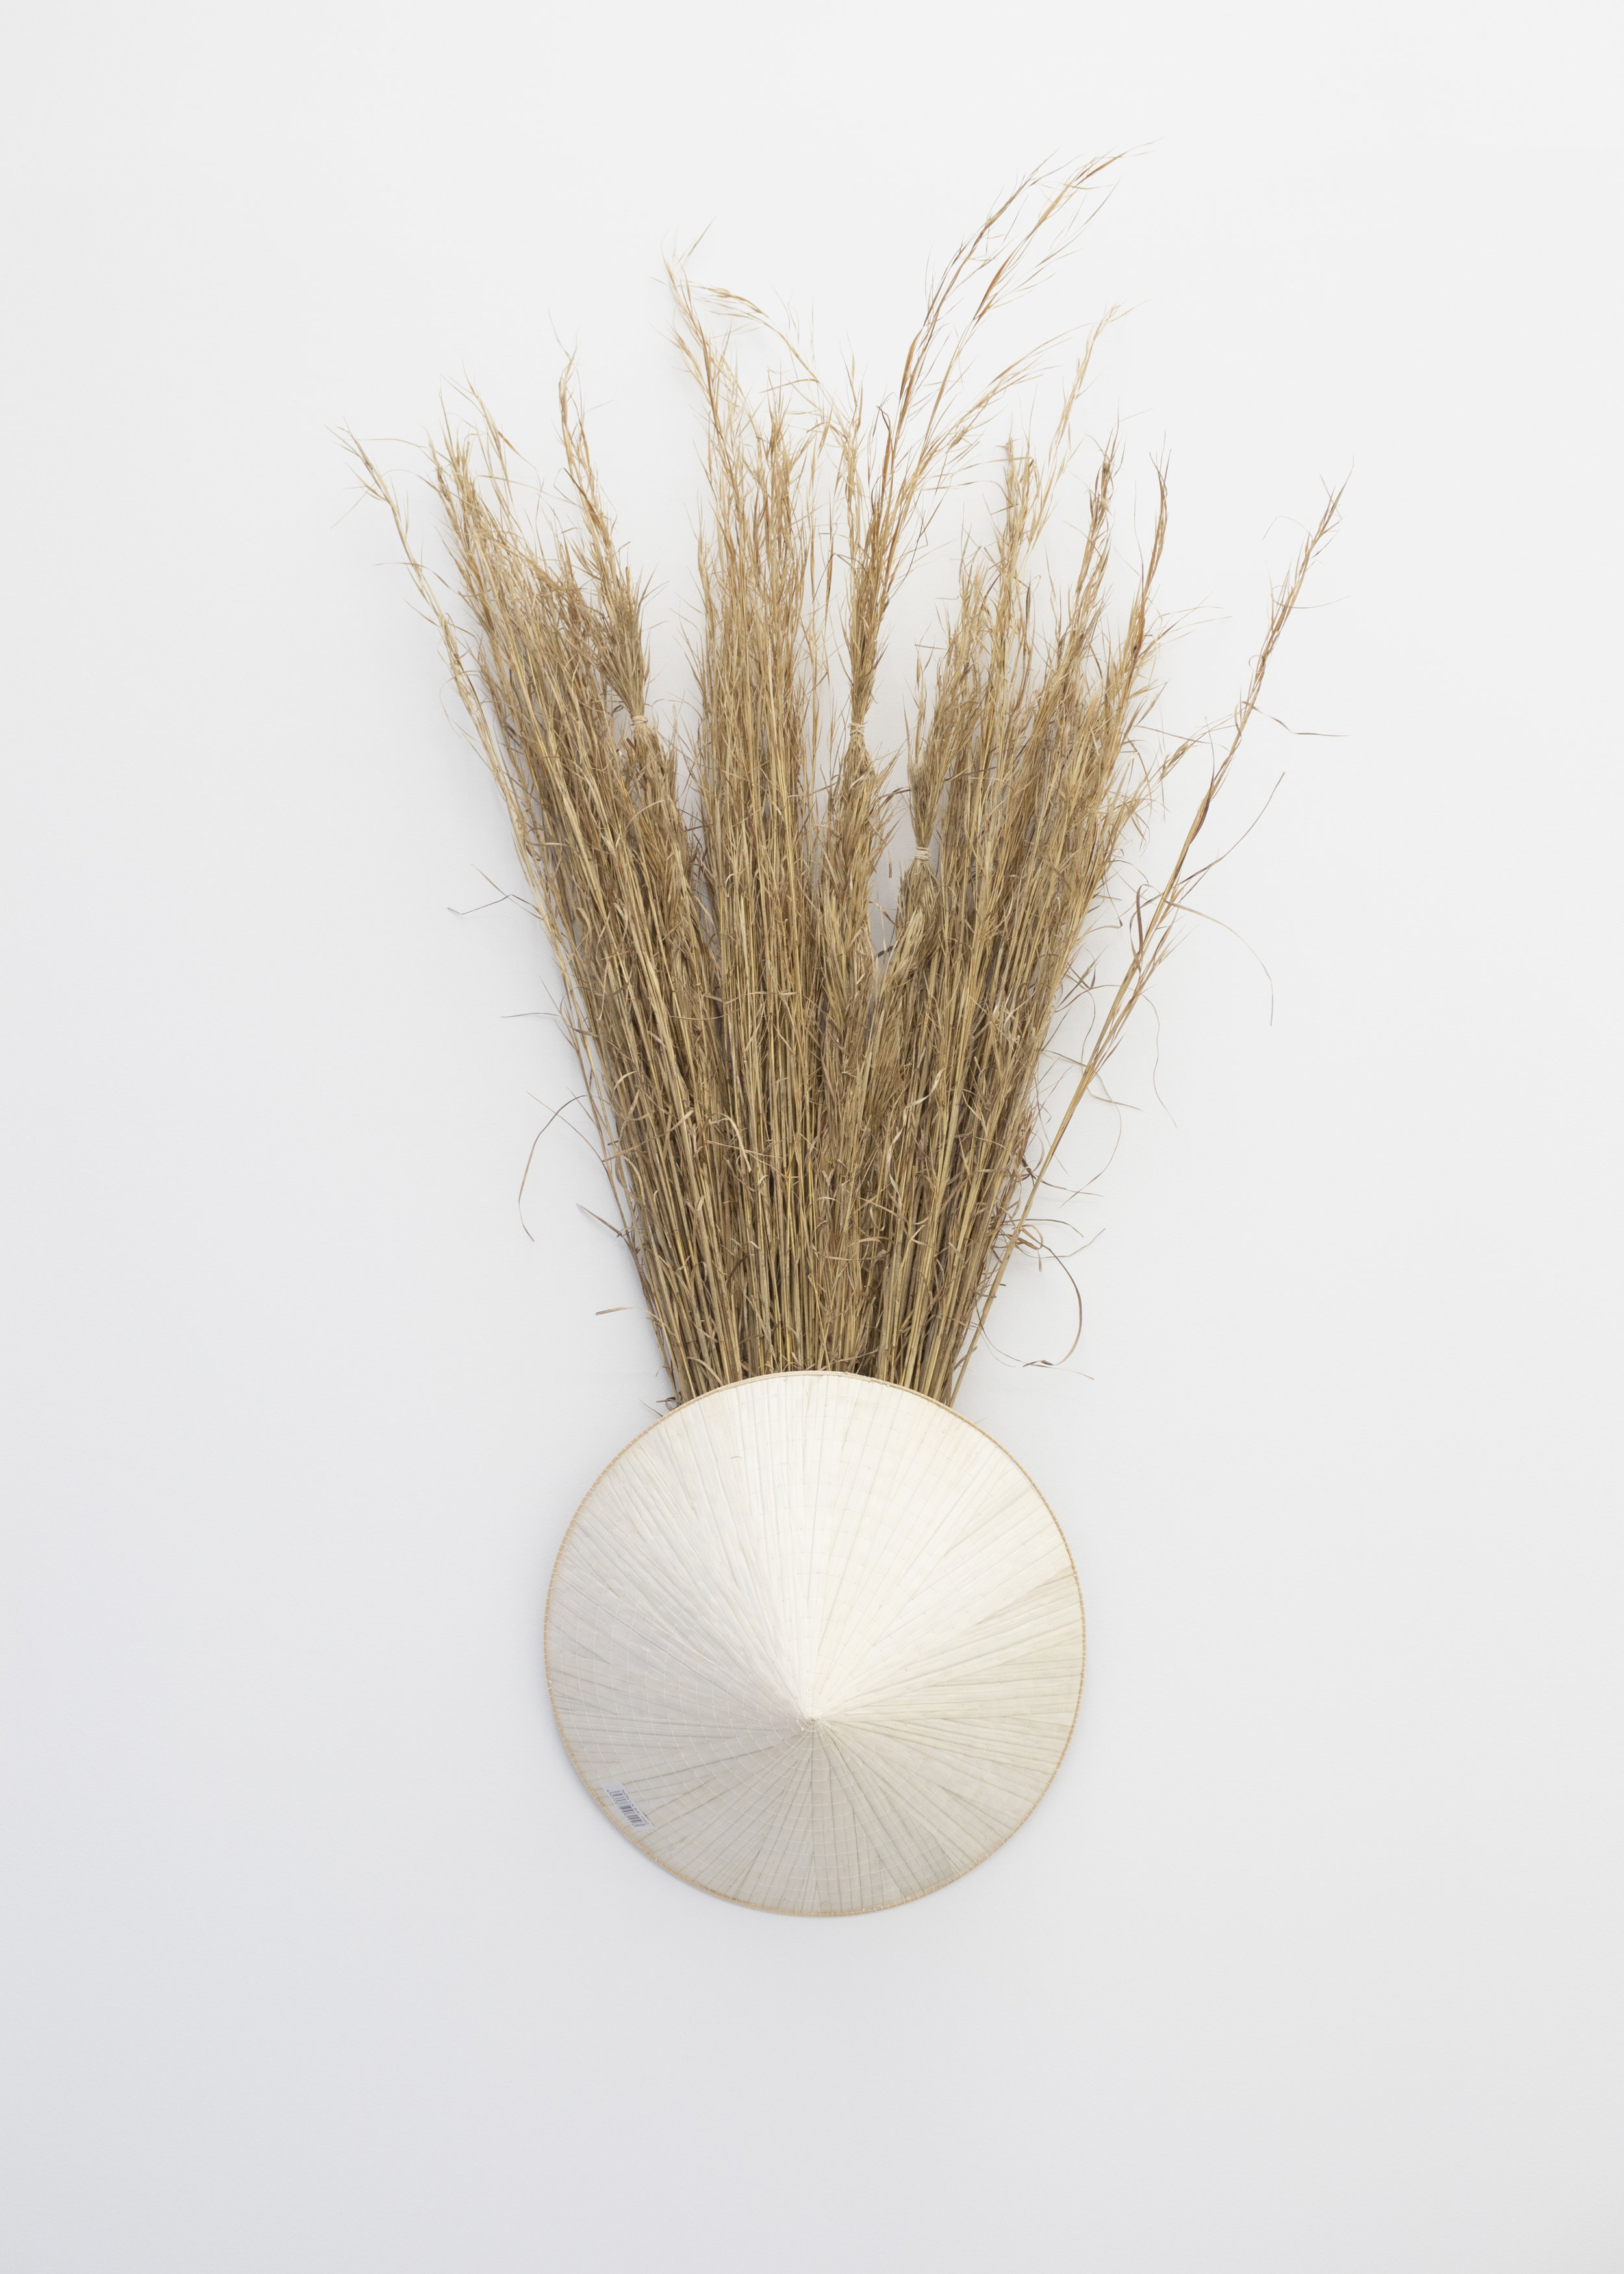  Millian Giang Lien Pham,  Preforge: 9 Stages (One) , 2019. Grass, conical hat 